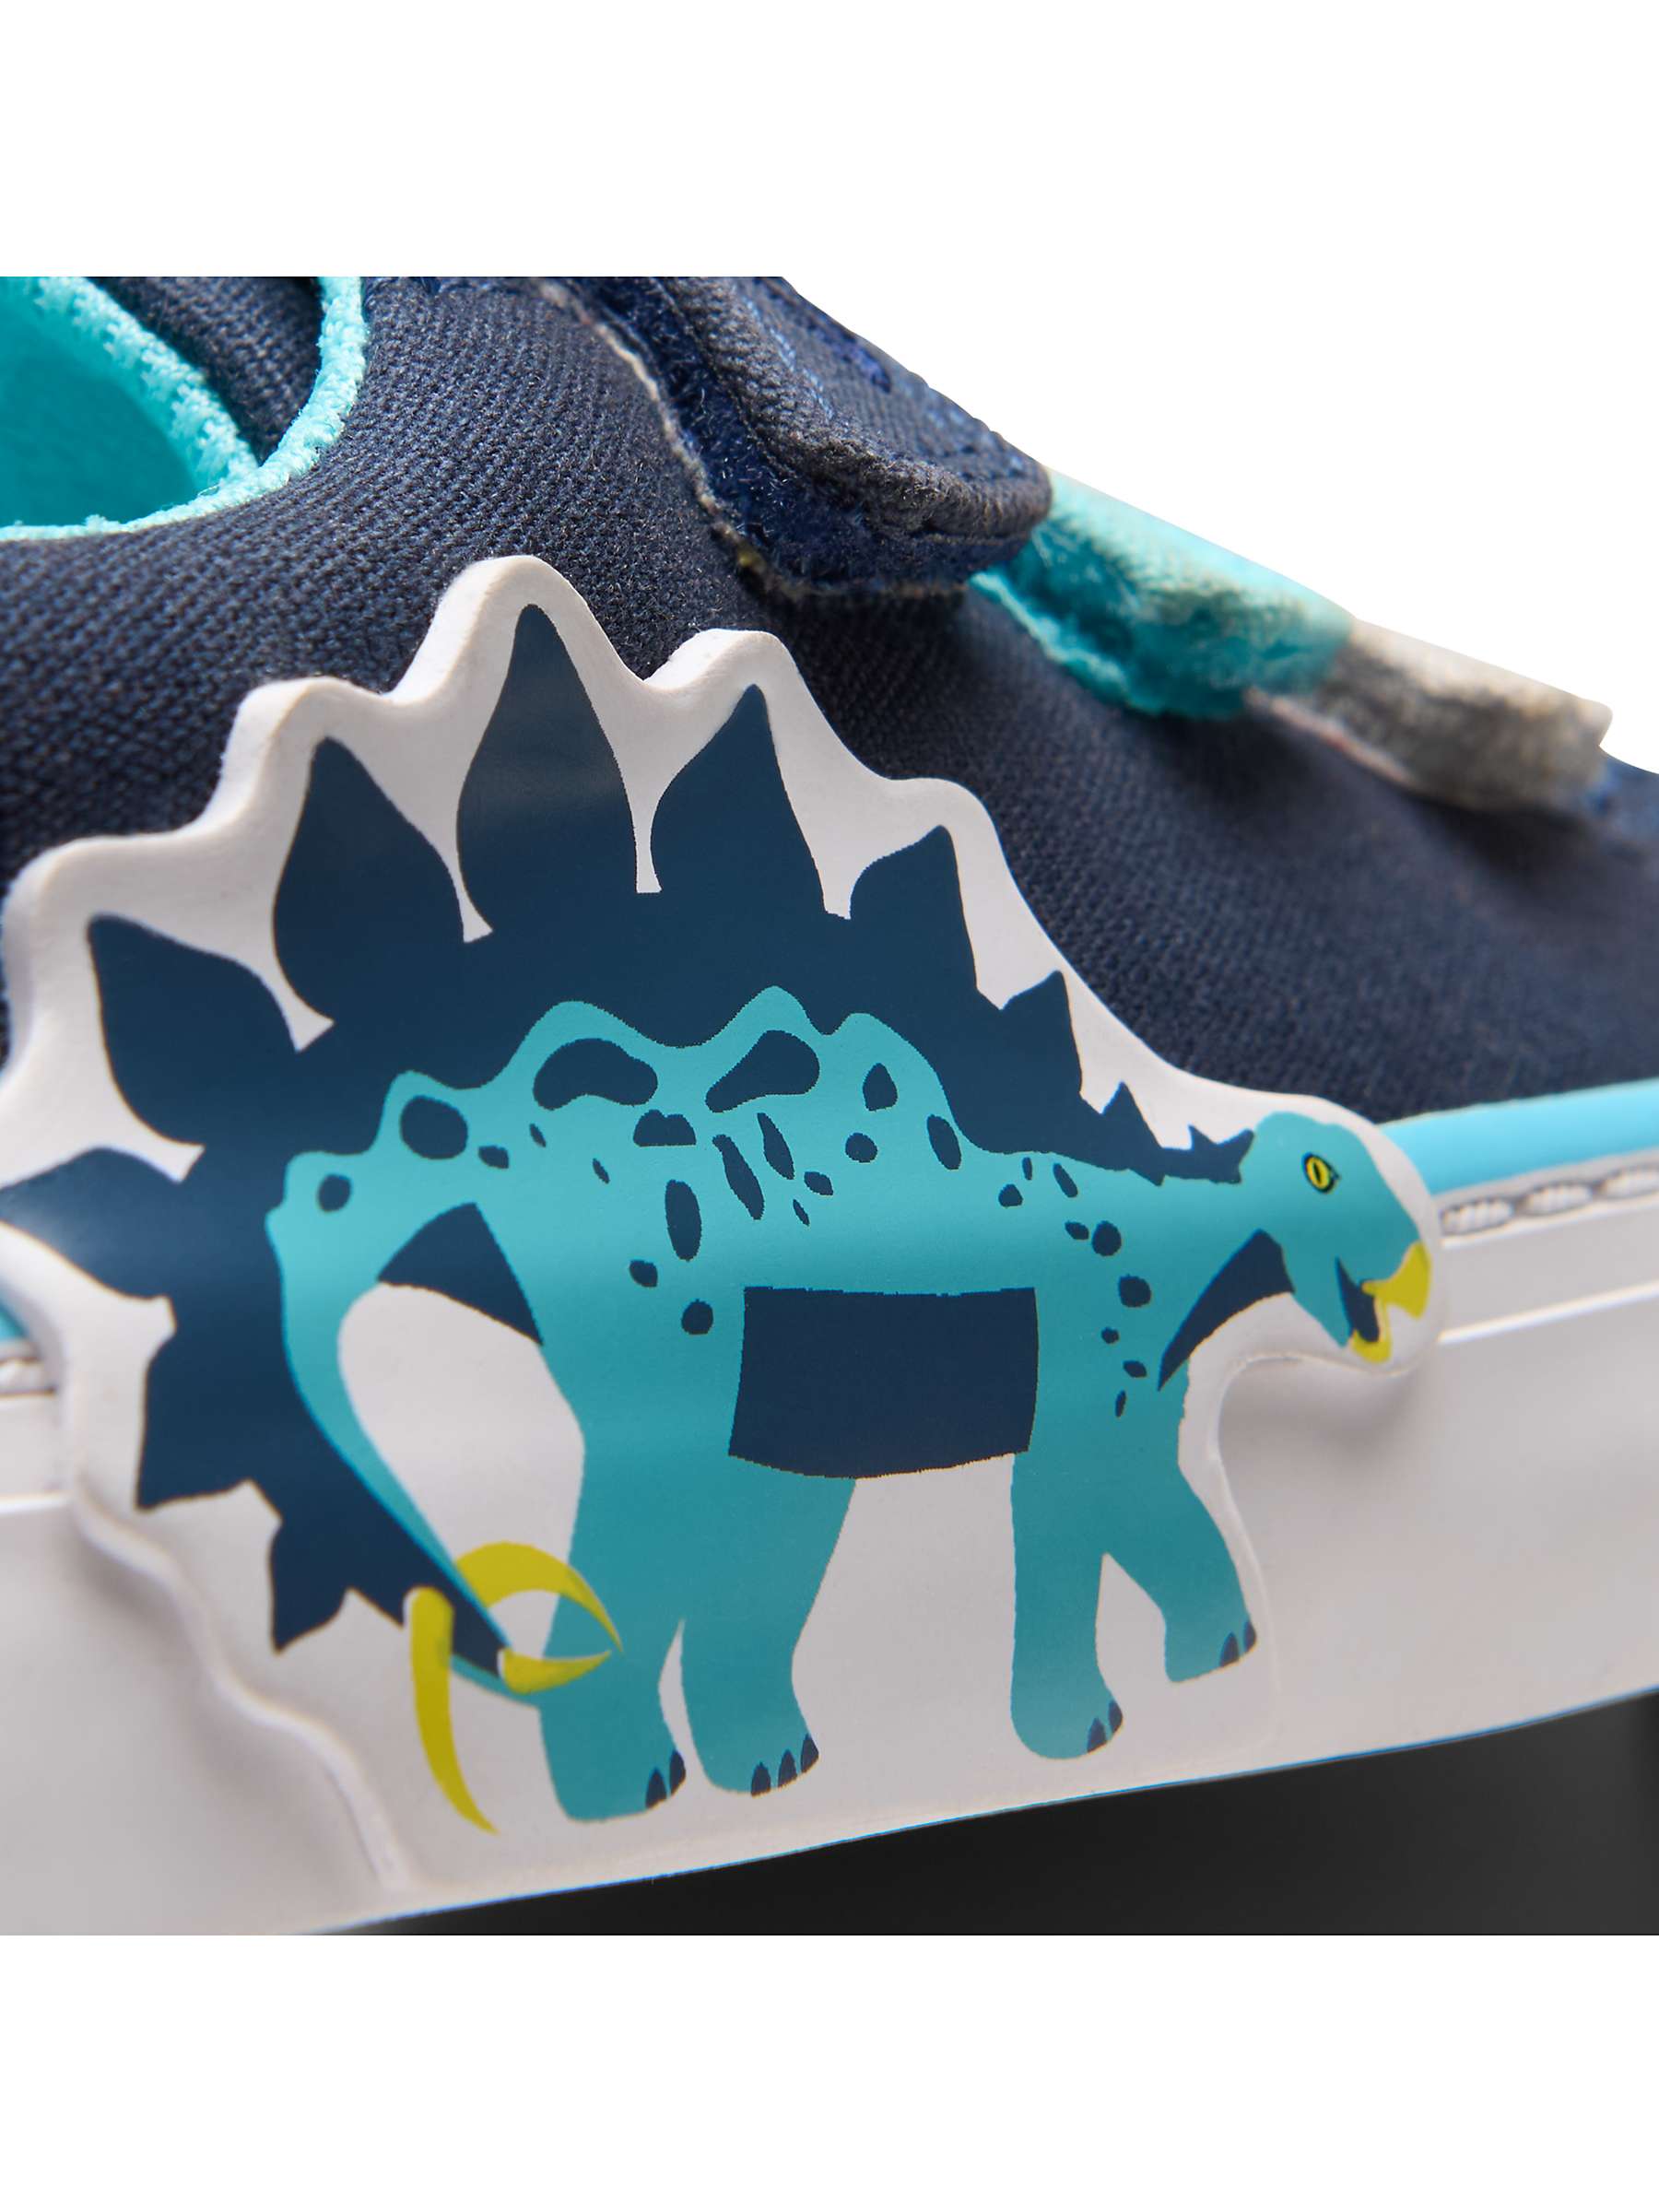 Buy Clarks Kids' Foxing Tail Dinosaur Trainers, Navy/Multi Online at johnlewis.com